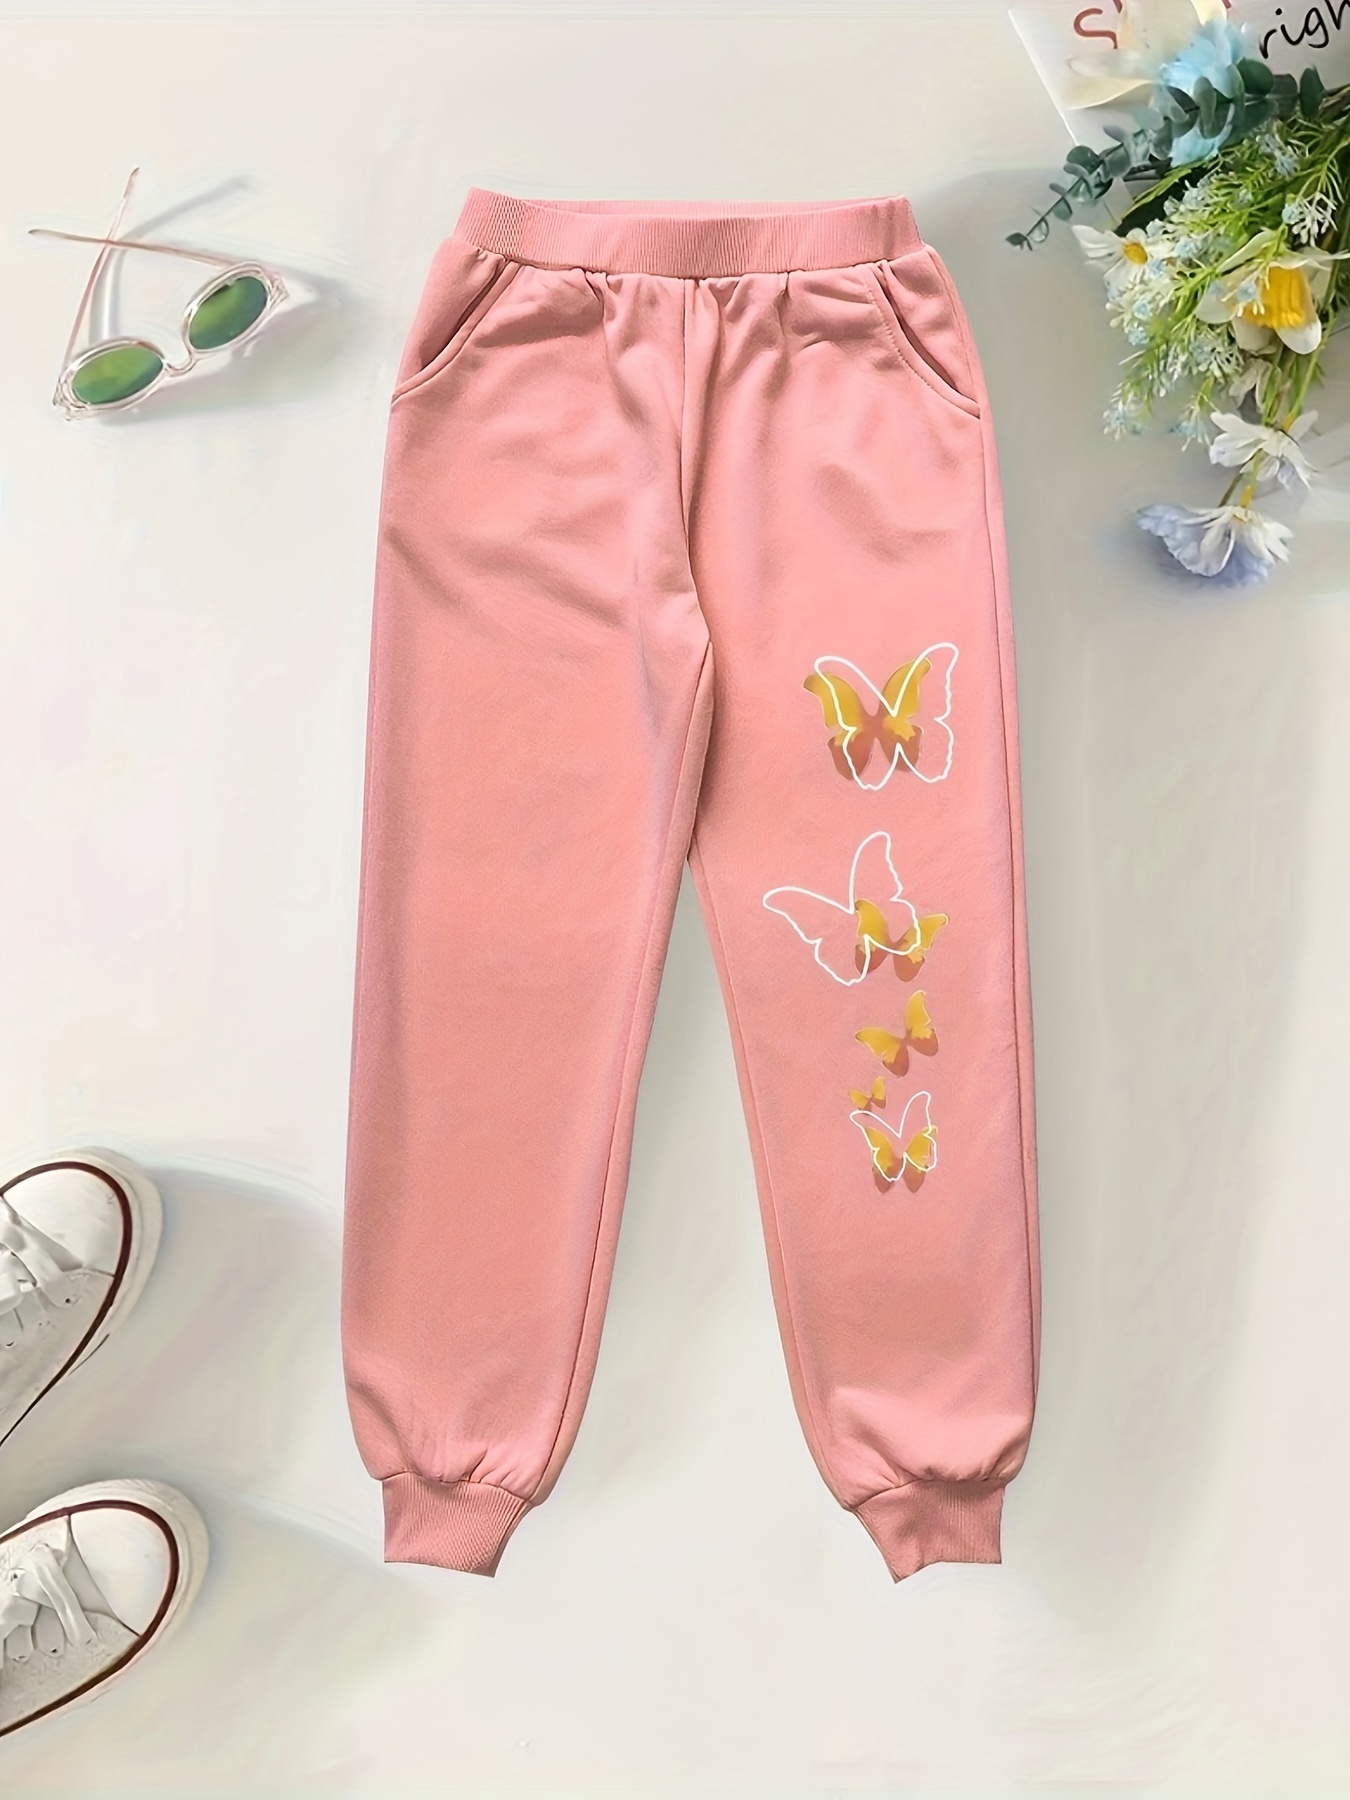 Girl's Street Style Outfit 3pcs, Hoodie & Cami Top & Sweatpants Set,  BUTTERFLY AND FLOWERS Print Kid's Clothes For Spring Fall